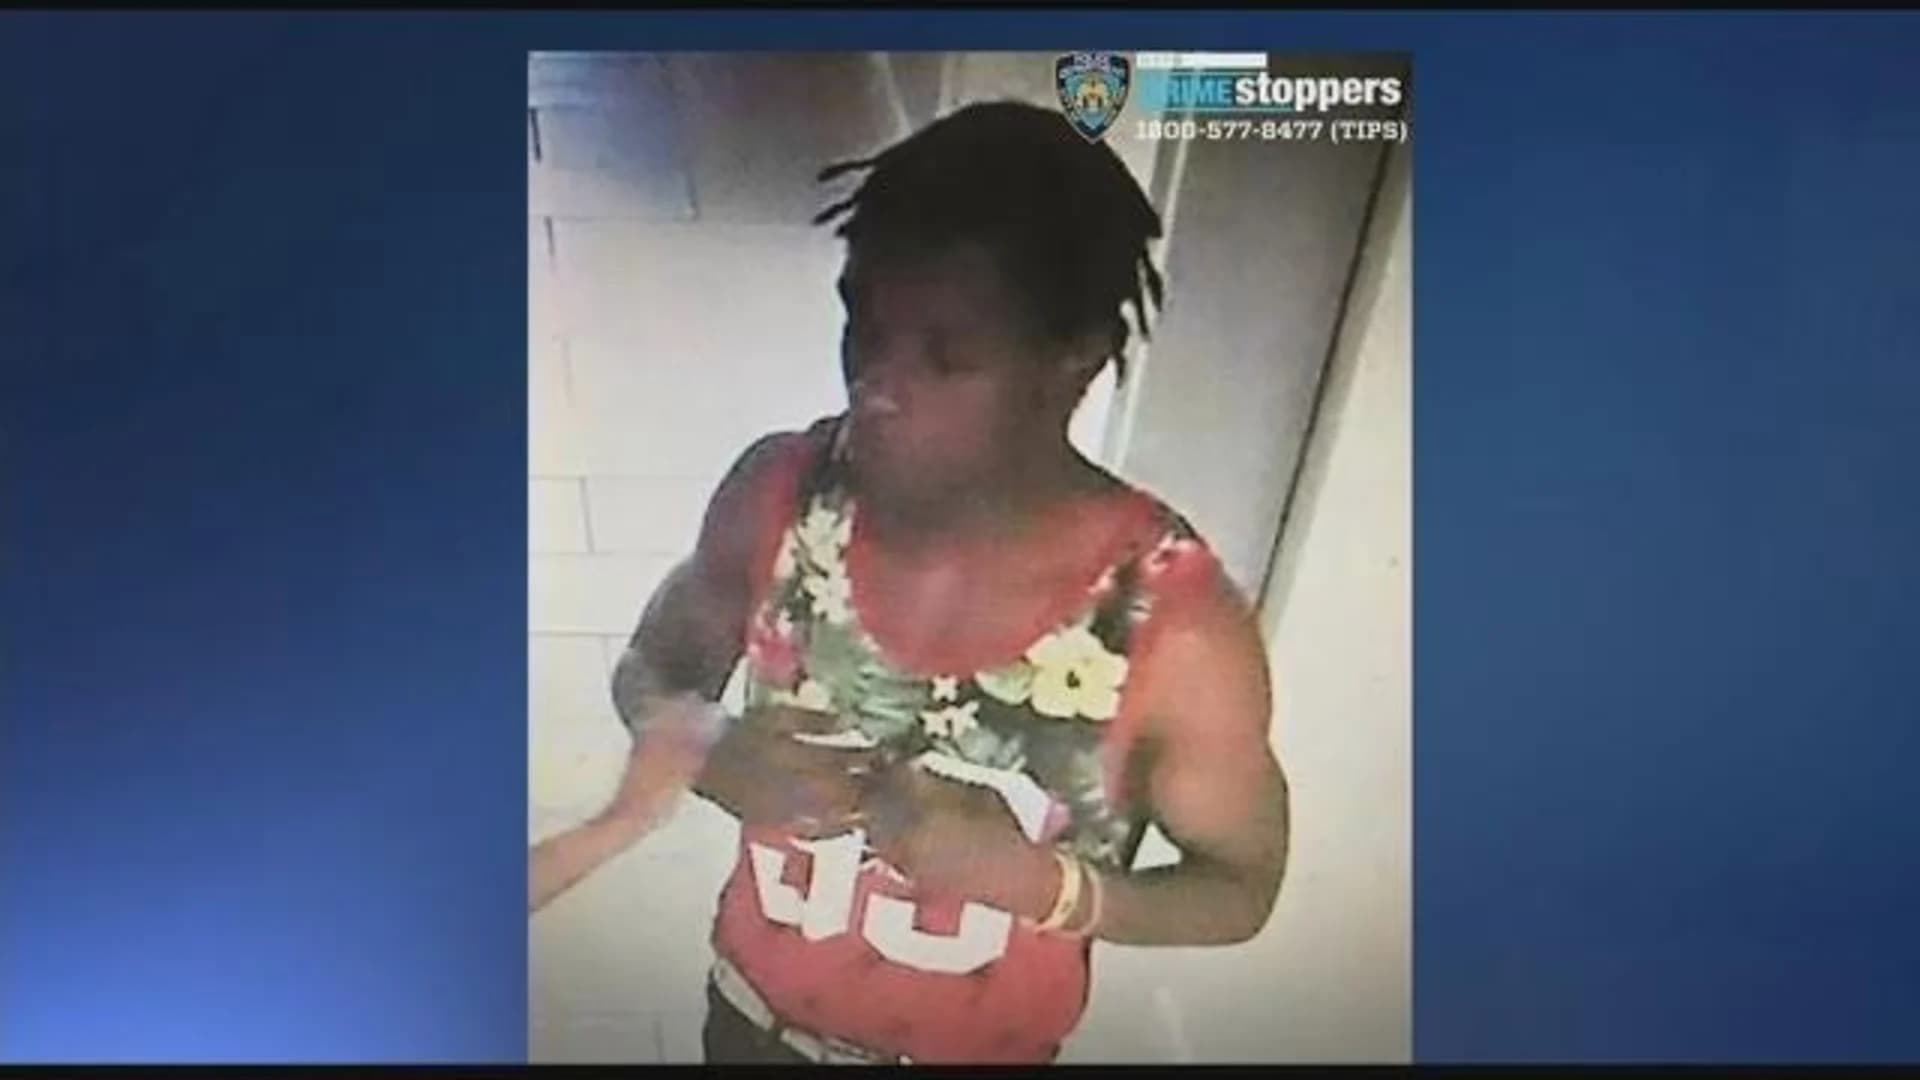 Police release image of suspect wanted in fatal Olinville stabbing